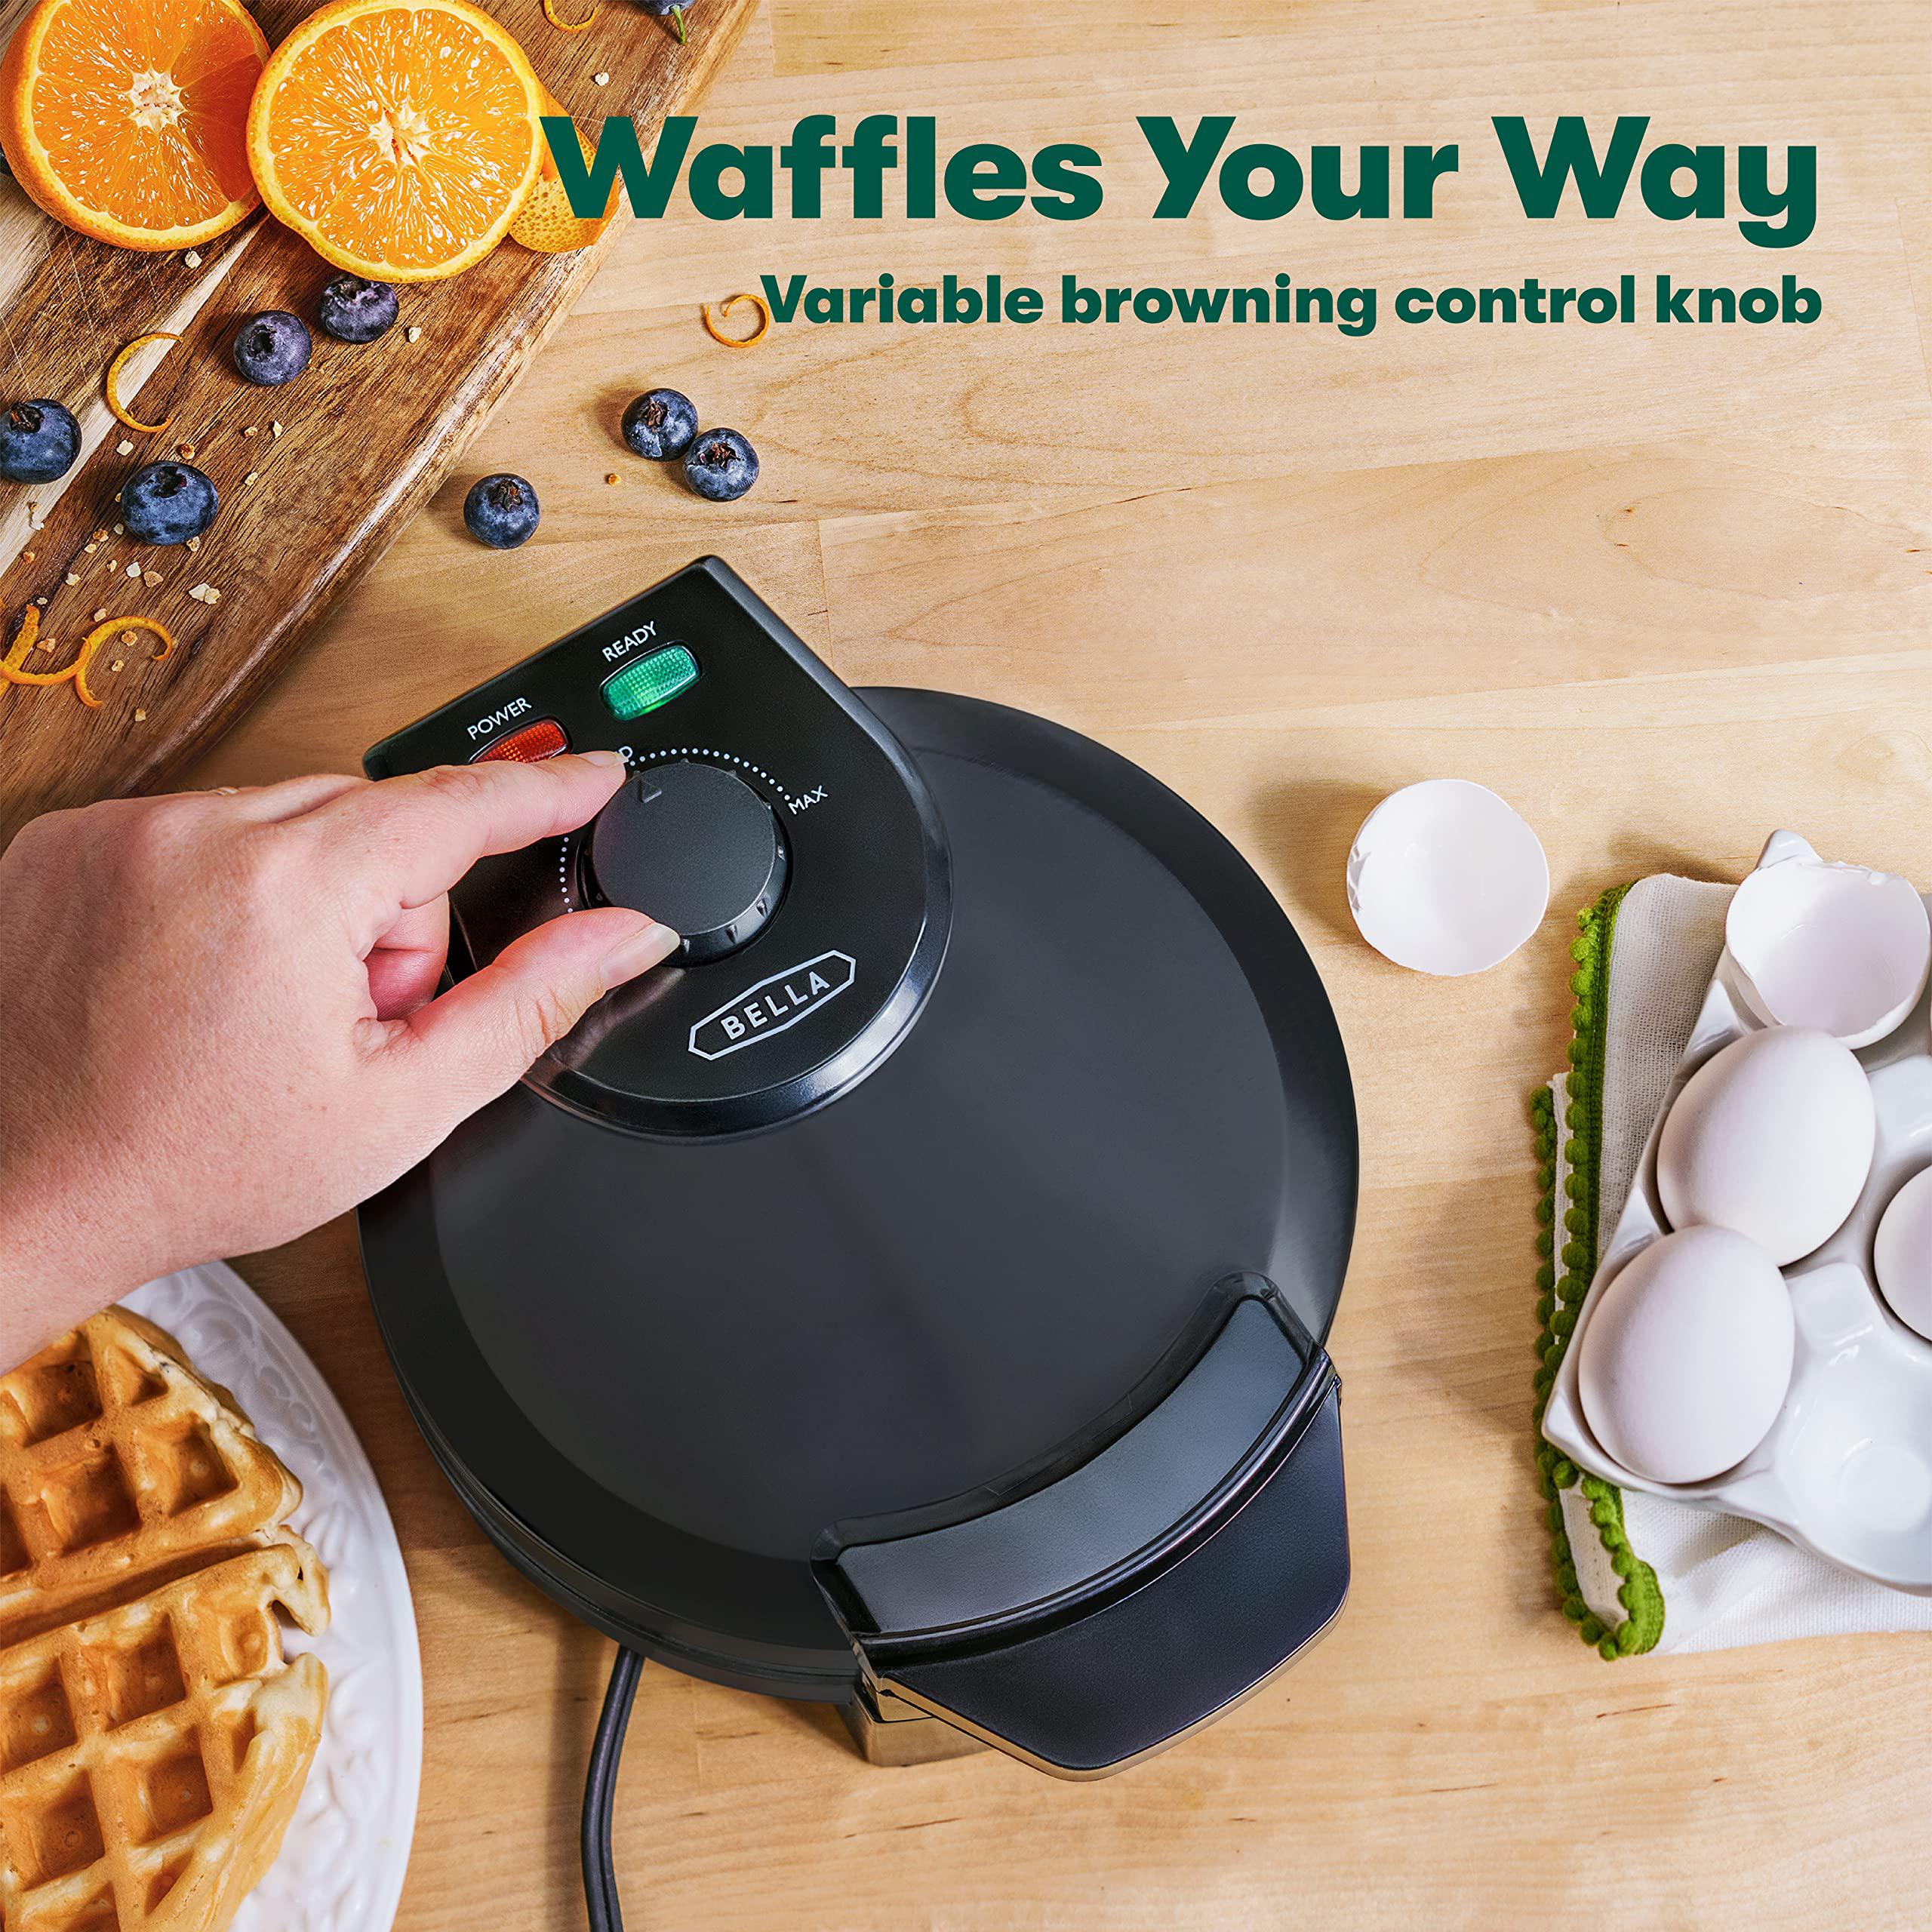 bella classic belgian waffle maker, nonstick extra deep plates, browning control knob, locking latch and cool touch handle, 7